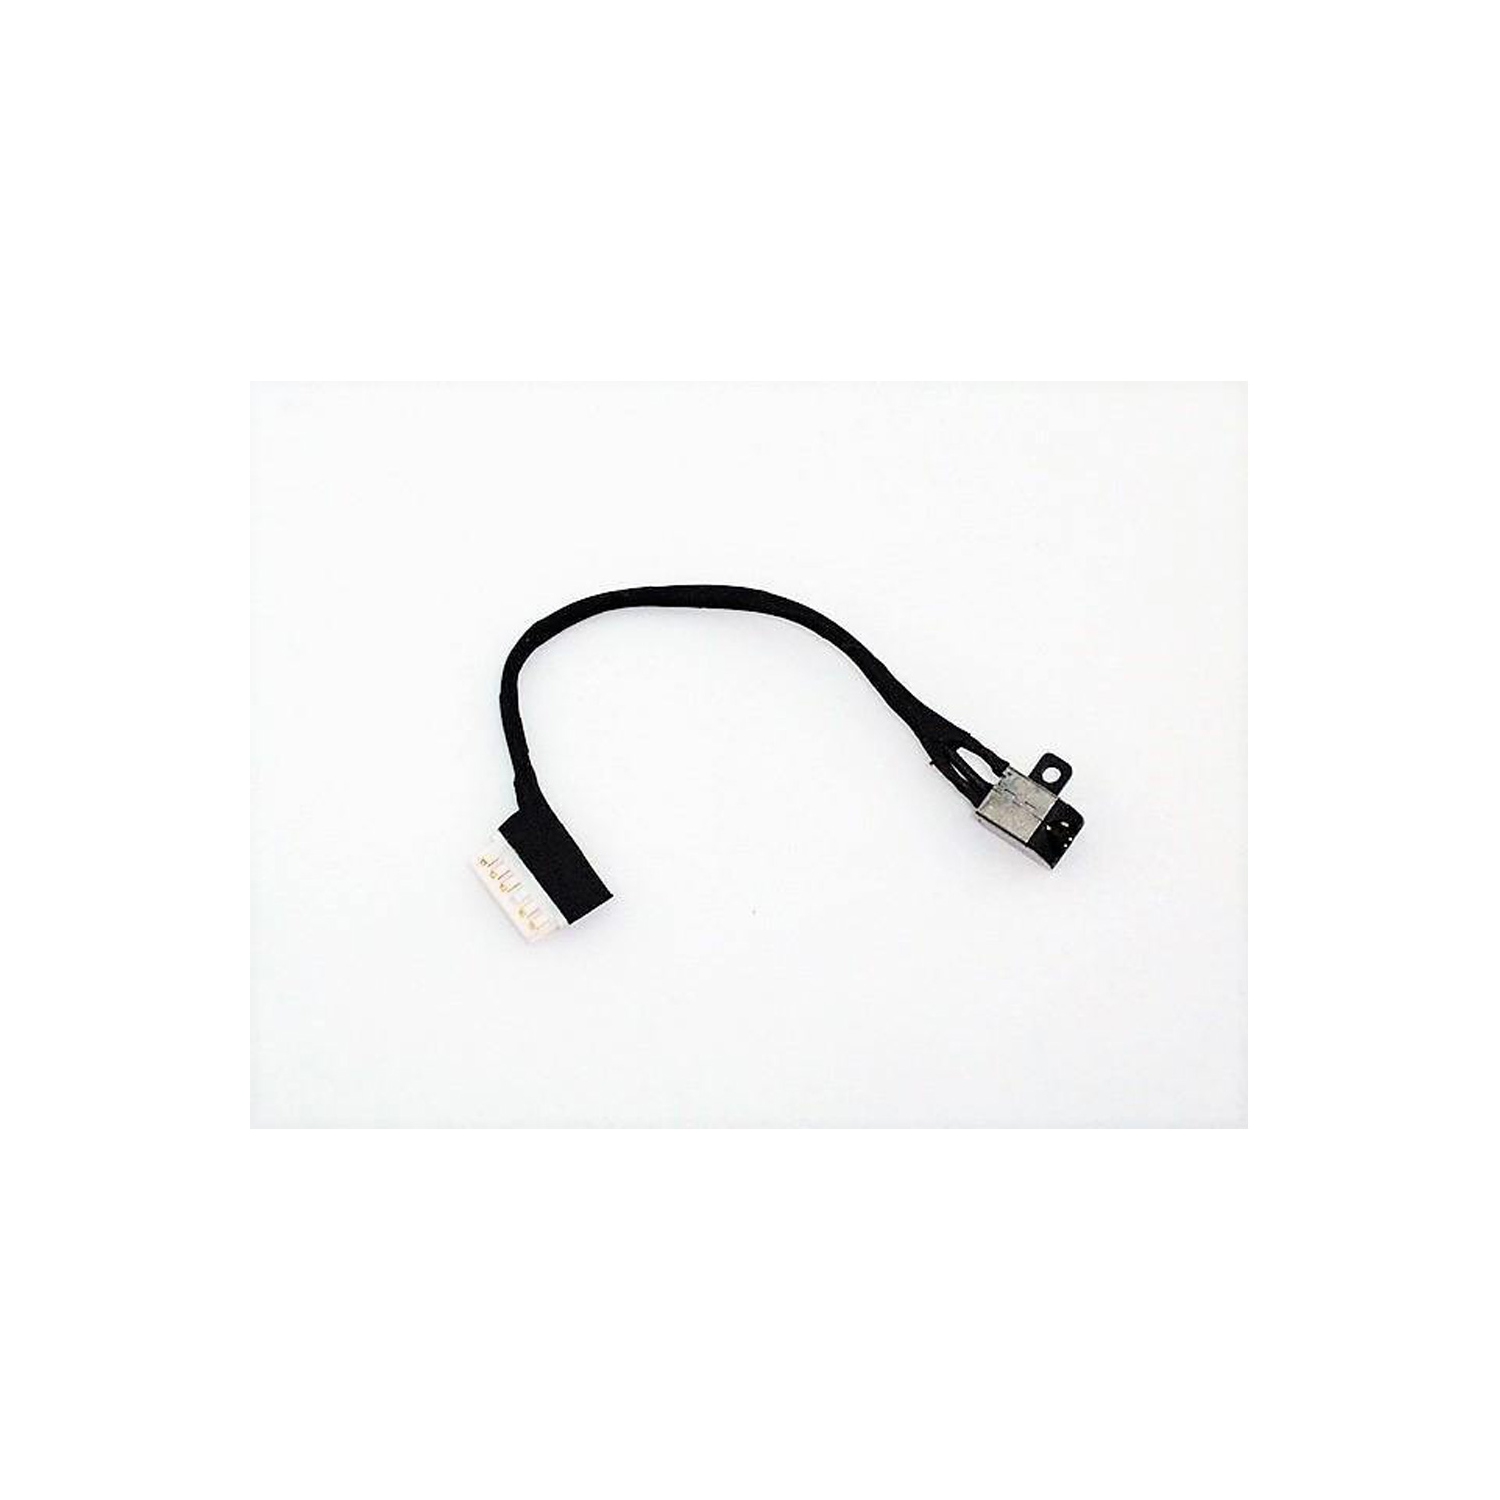 New Dell Inspiron 15 5570 5575 5770 5775 17 5000 5770 5775 DC Jack Cable 2K7X2 02K7X2 DC0301011B00